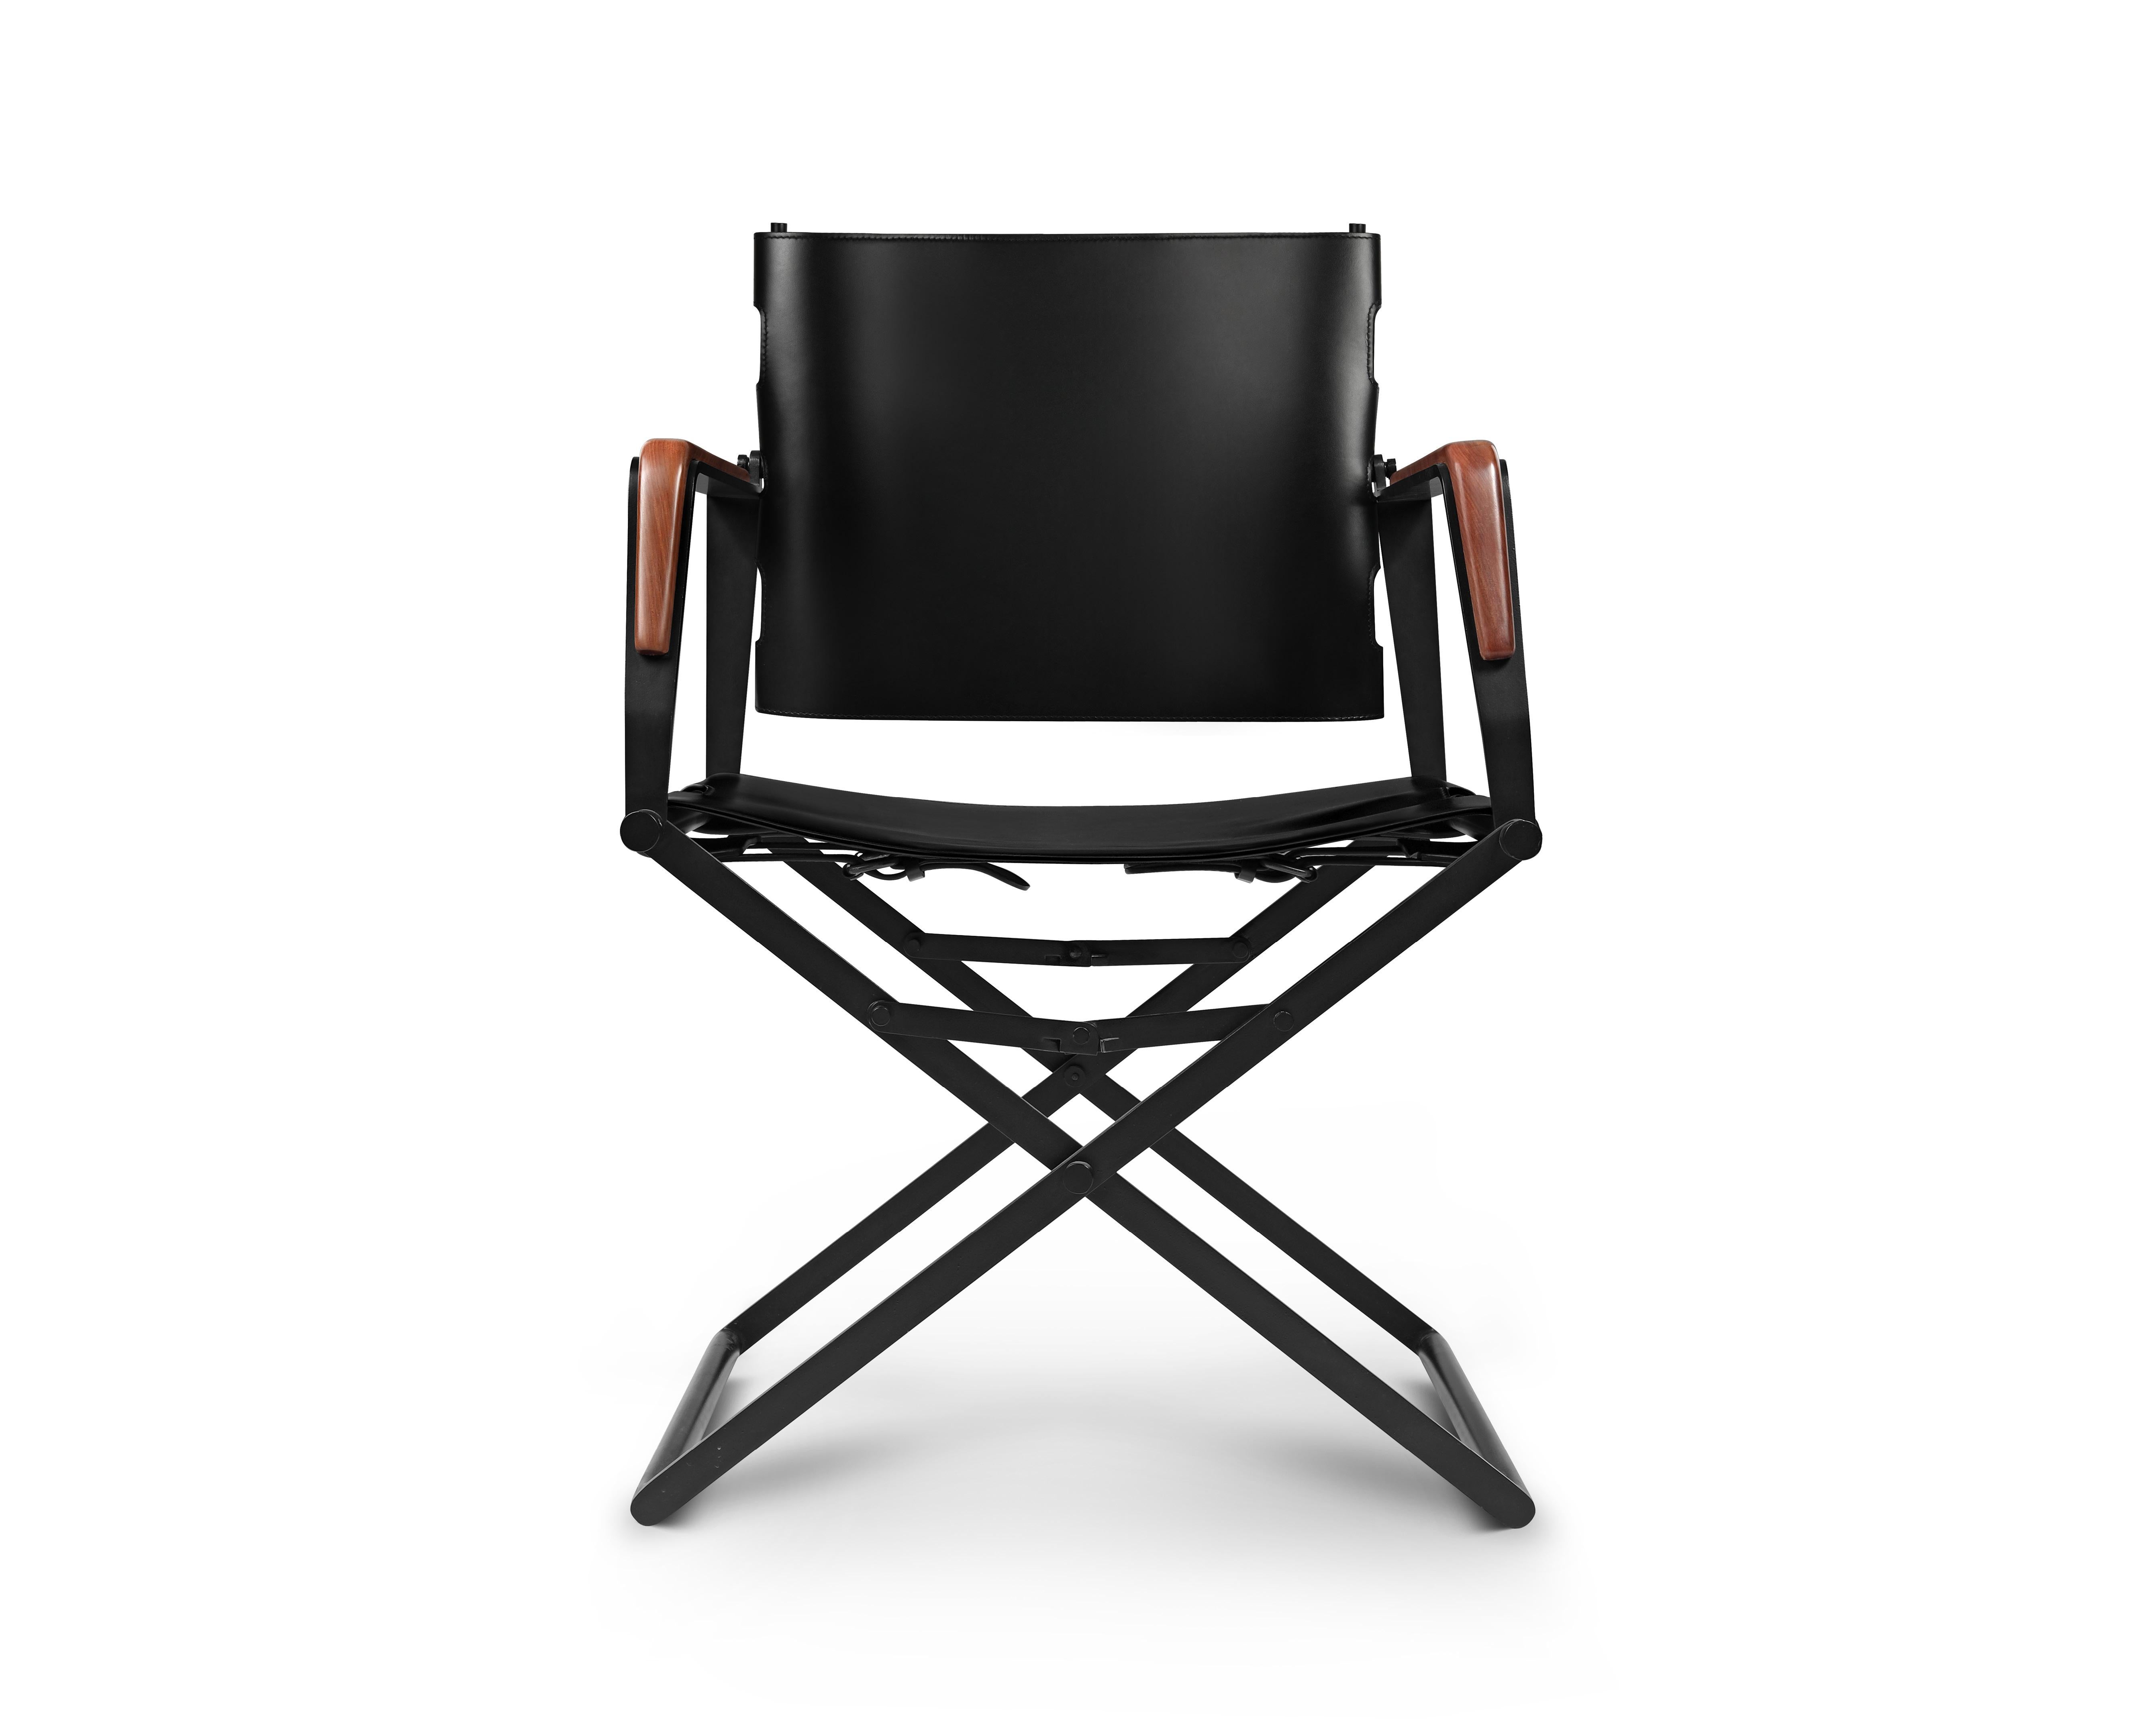 Retta armchair with leather and wood by Madheke
Dimensions: W 58.7 x D 56.2 x H 89.5 cm
Materials: leather, wood, metal

The RETTA consists of a folding frame paying tribute to the classic American style director's chair from the golden